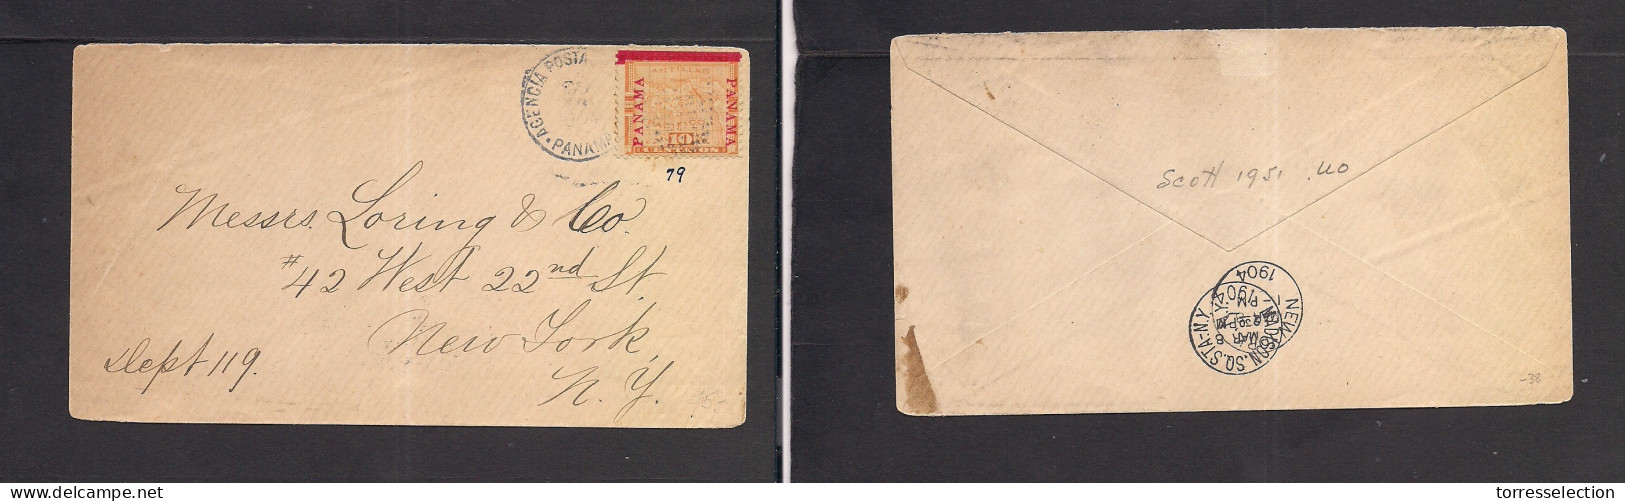 PANAMA. 1904. APN - USA, NYC. Fkd Red Ovptd Issue Envelope. - Panamá